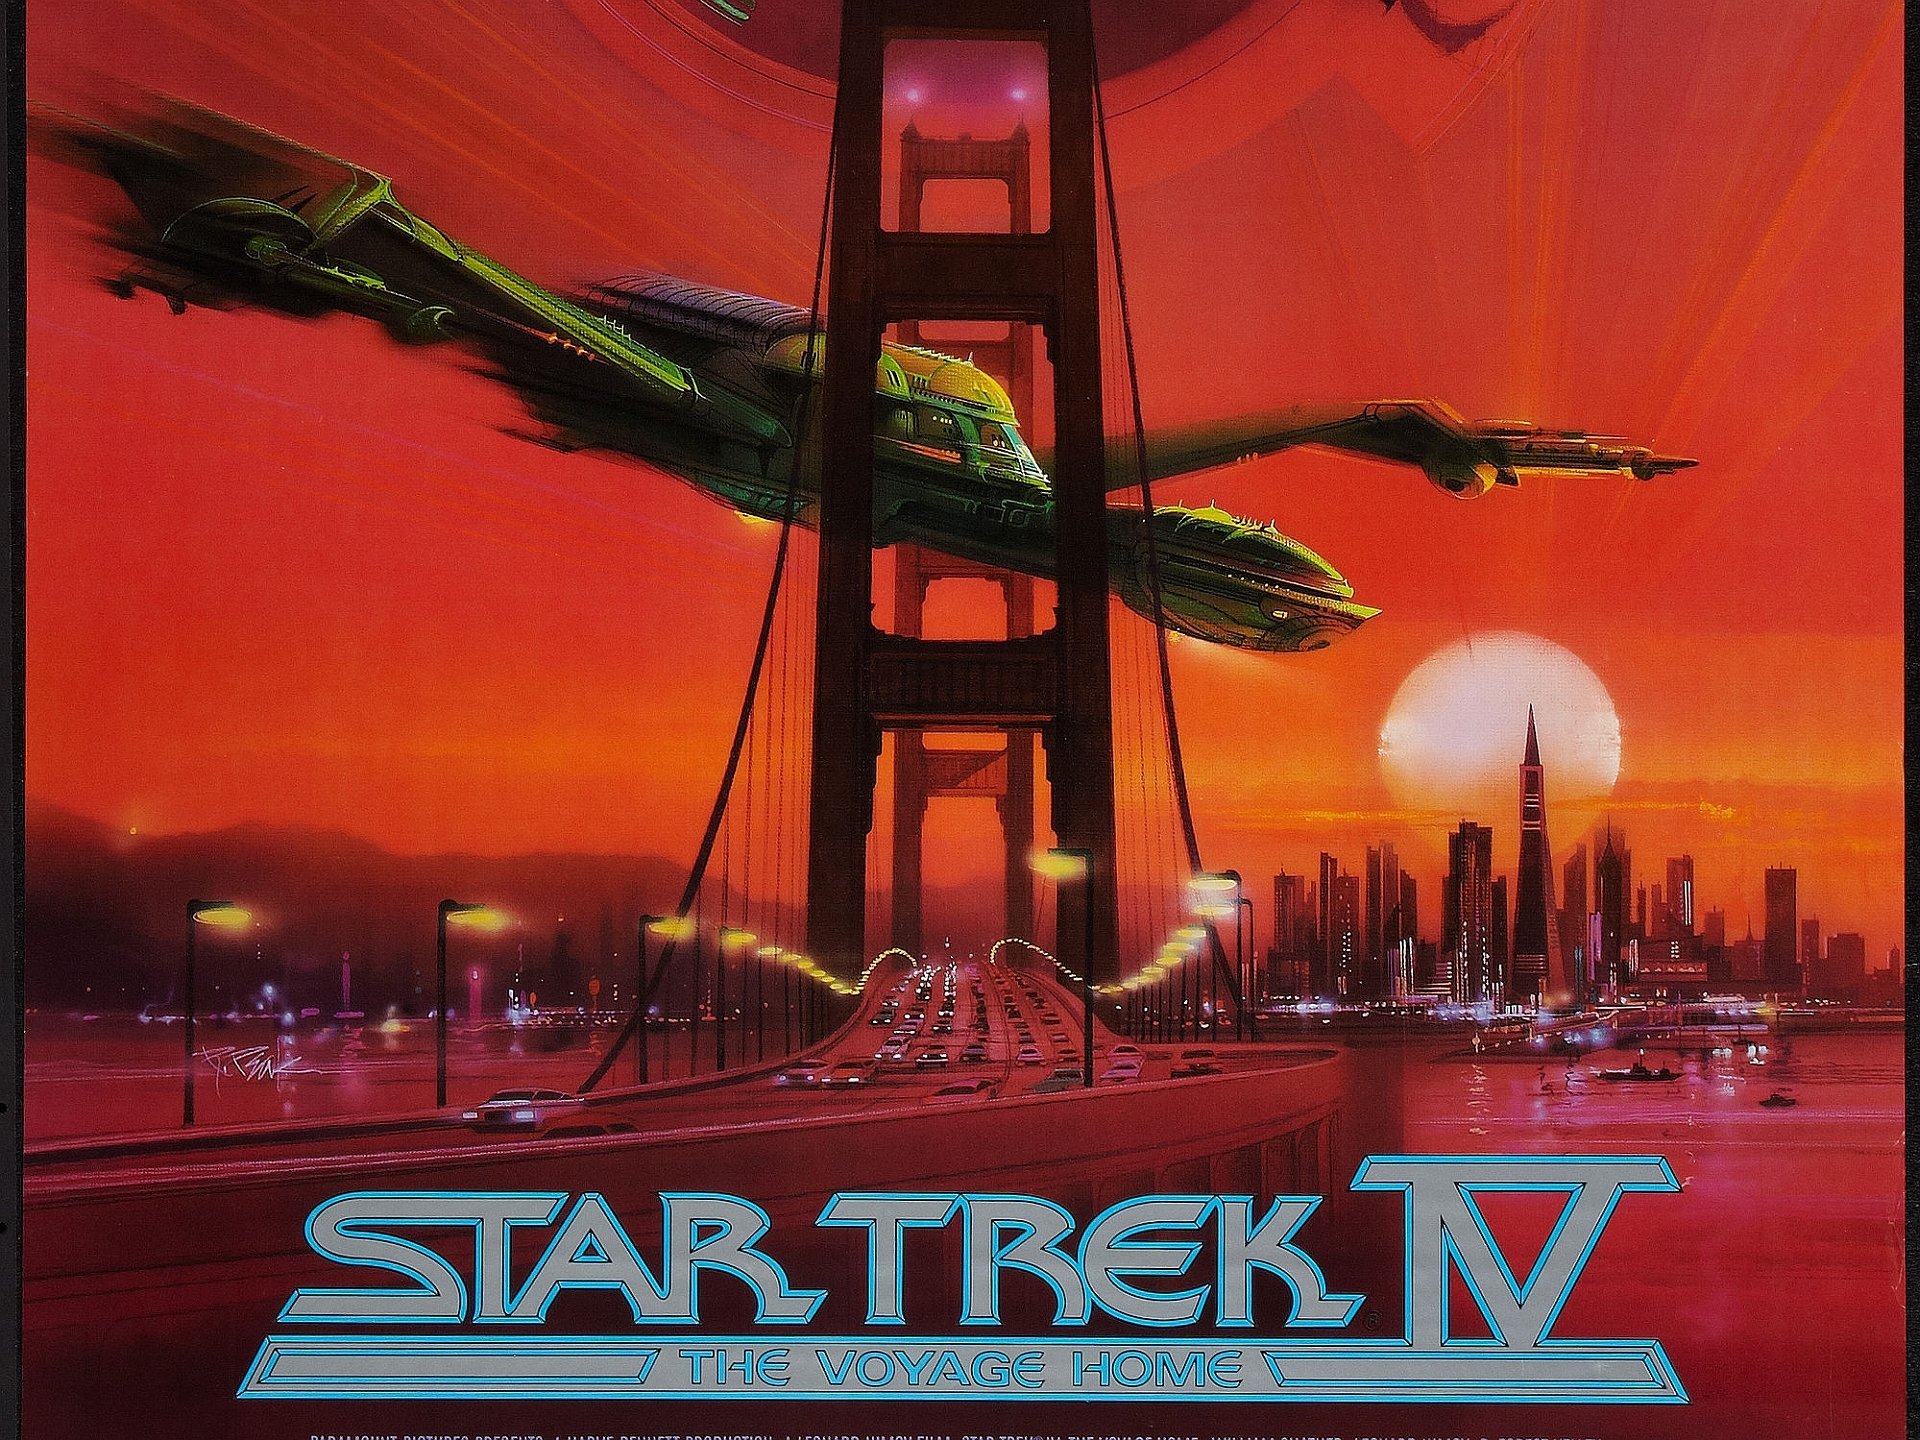 Star Trek IV: The Voyage Home HD Wallpaper and Background Image